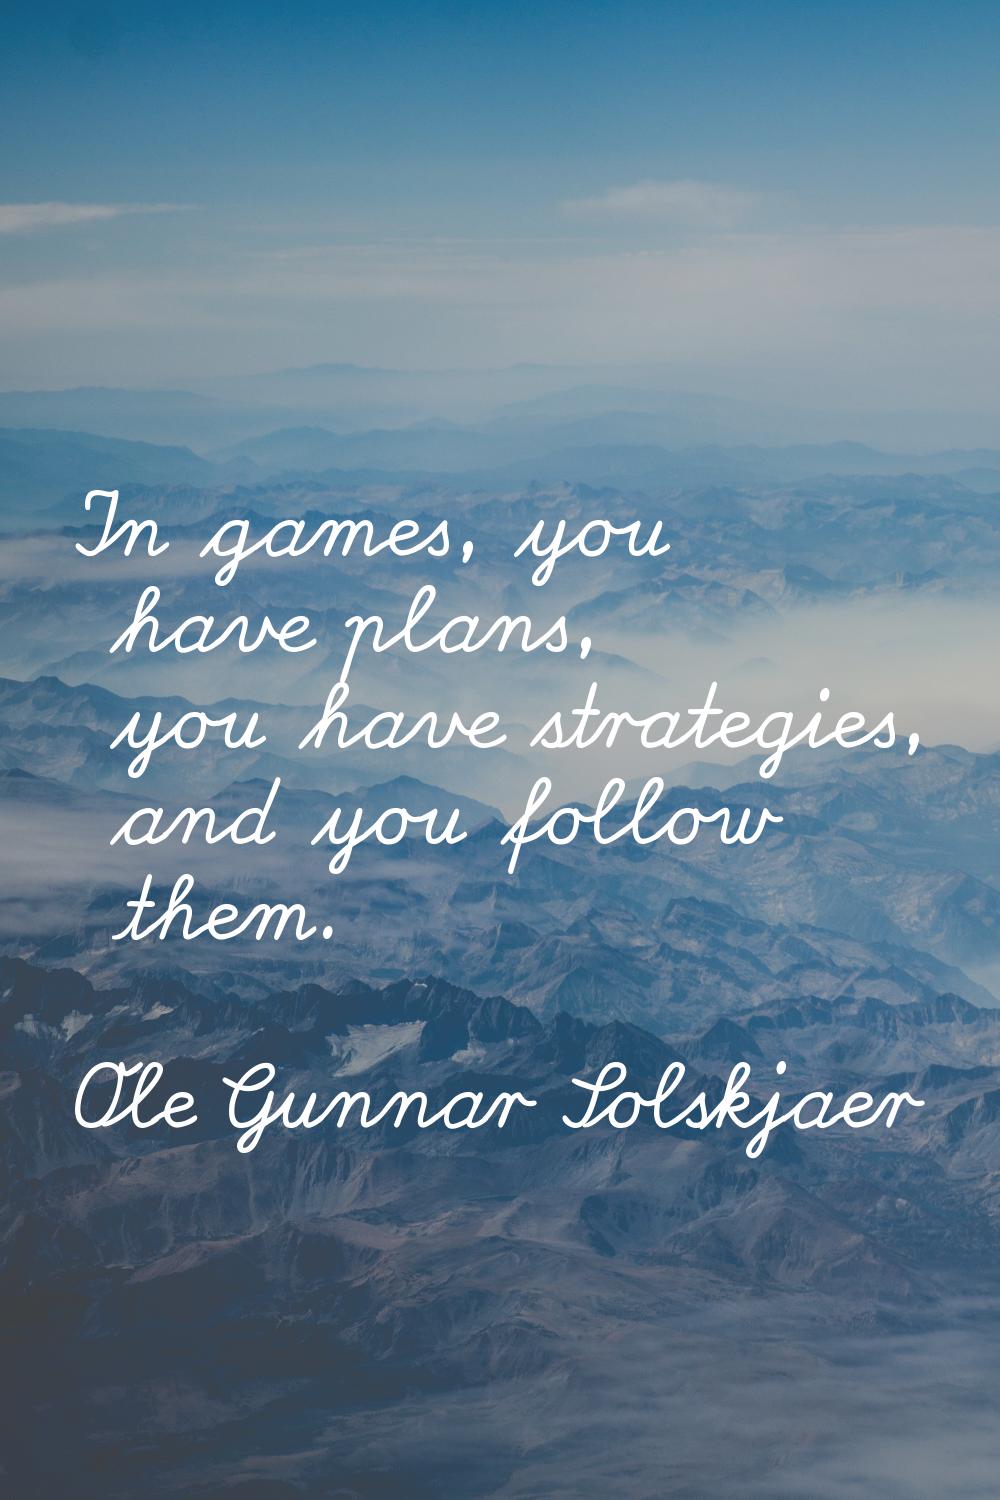 In games, you have plans, you have strategies, and you follow them.